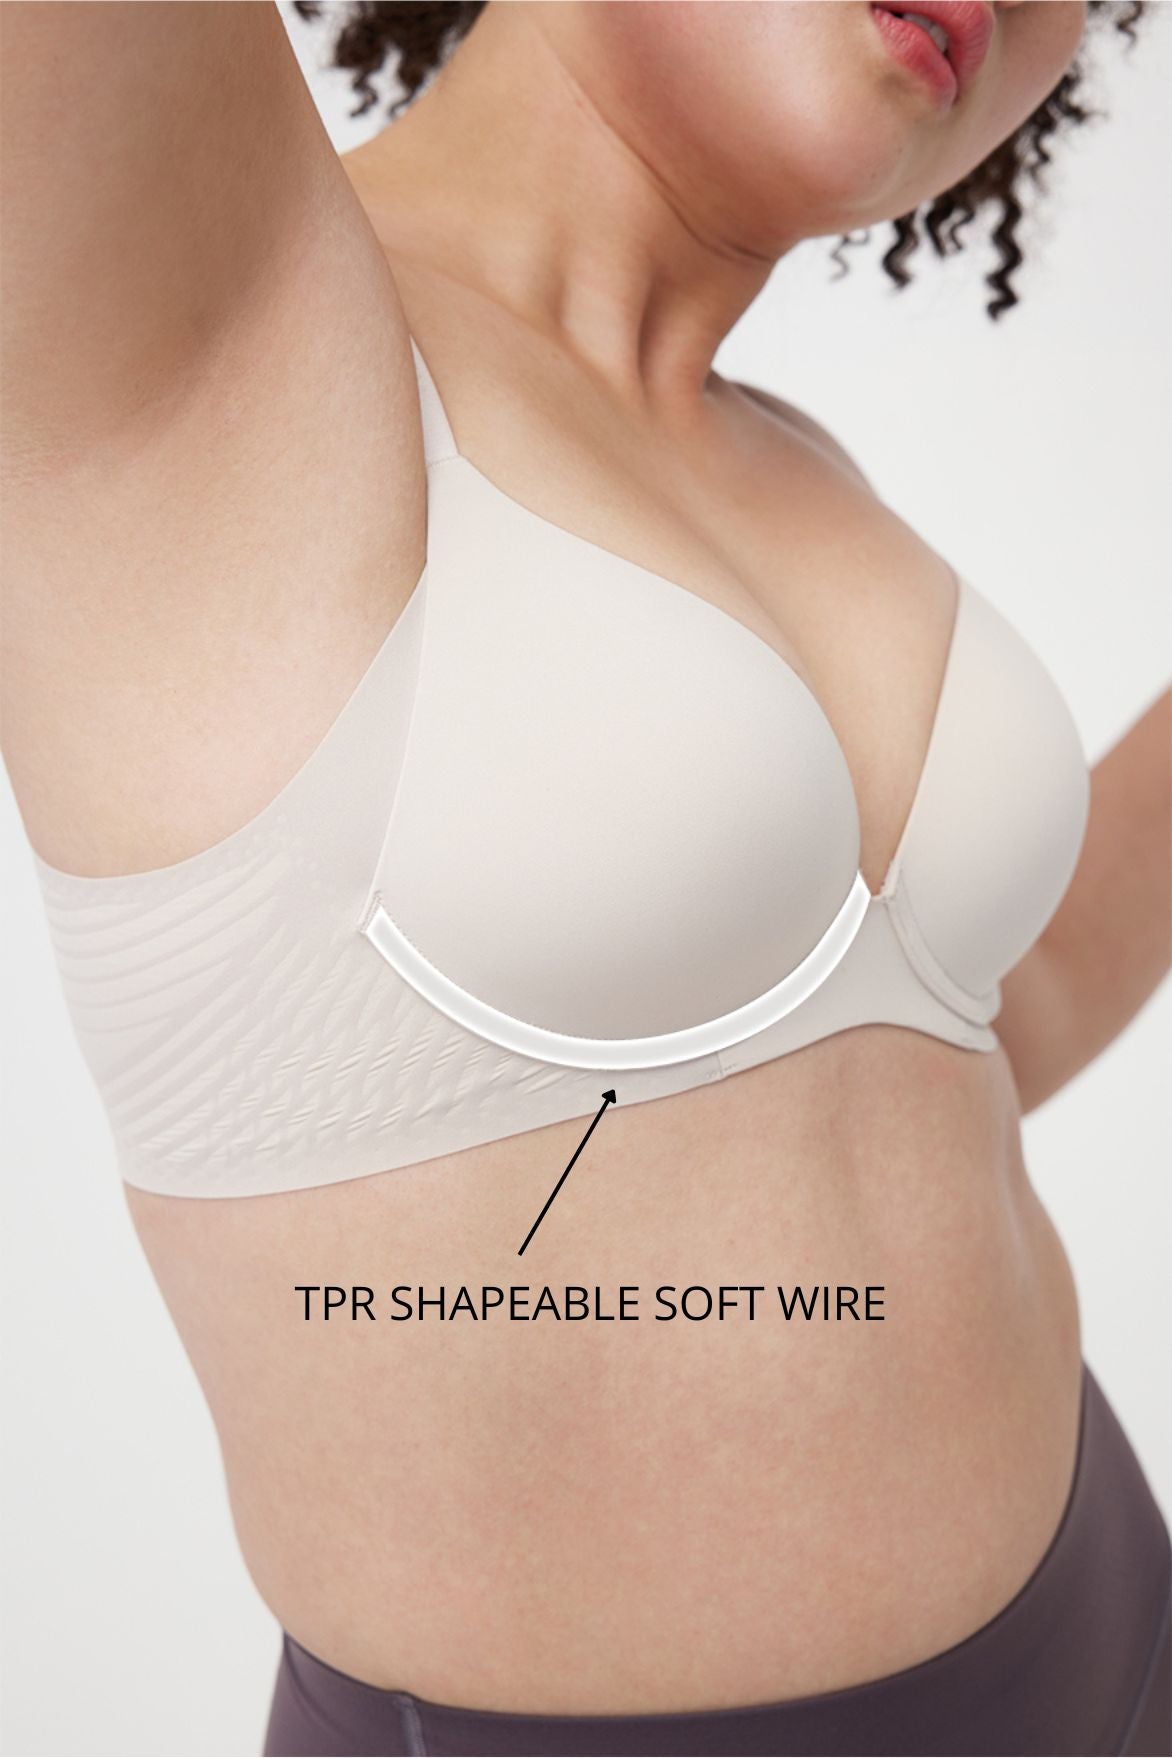 TPR shapeable soft wire